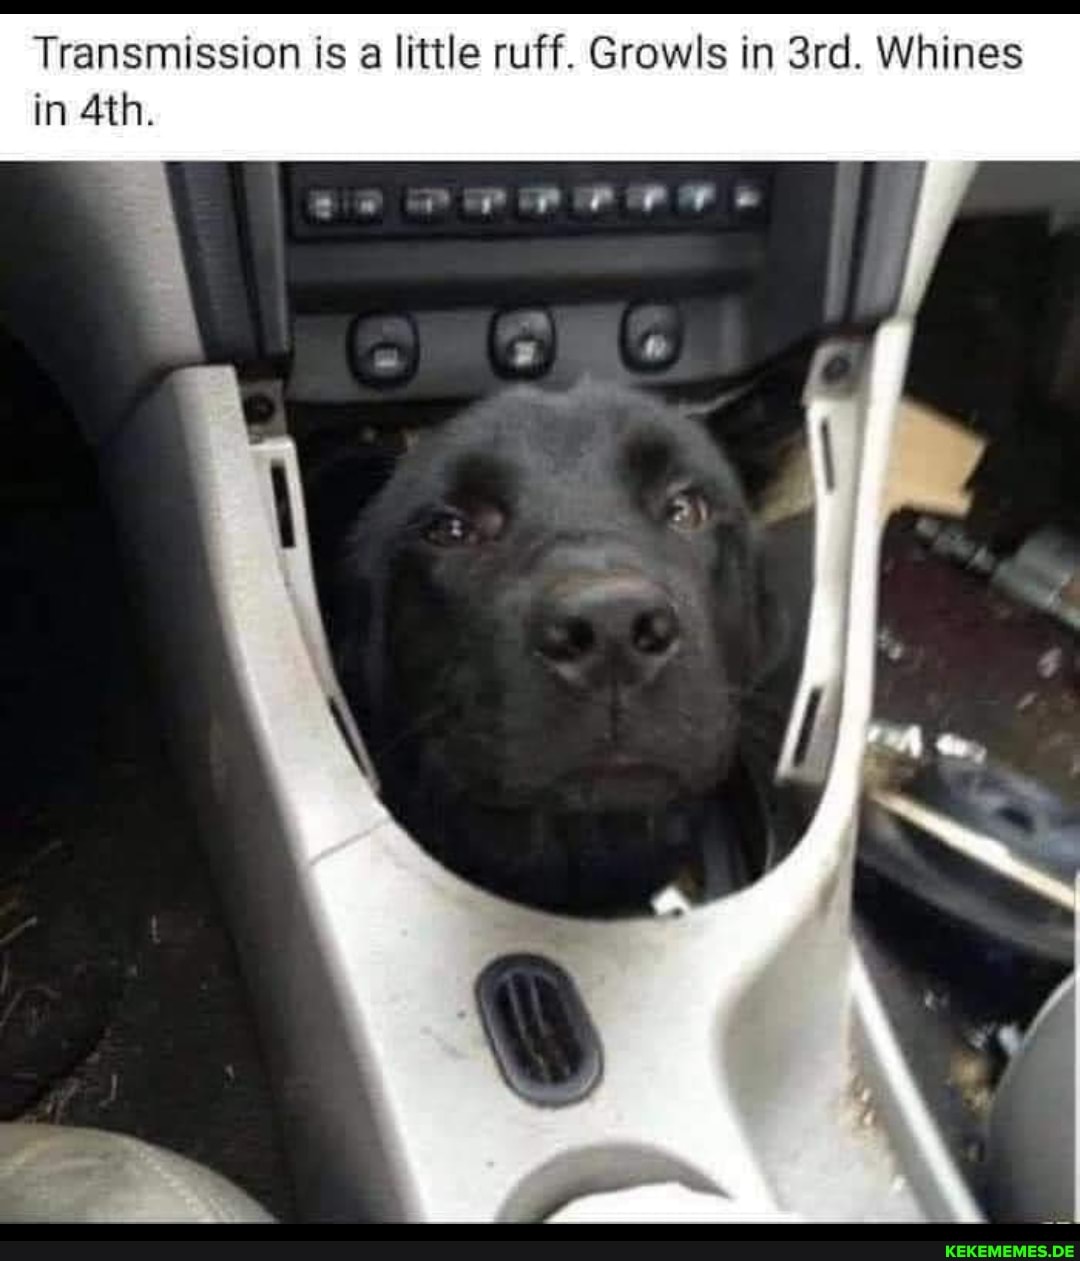 Transmission is a little ruff. Growls in Whines in